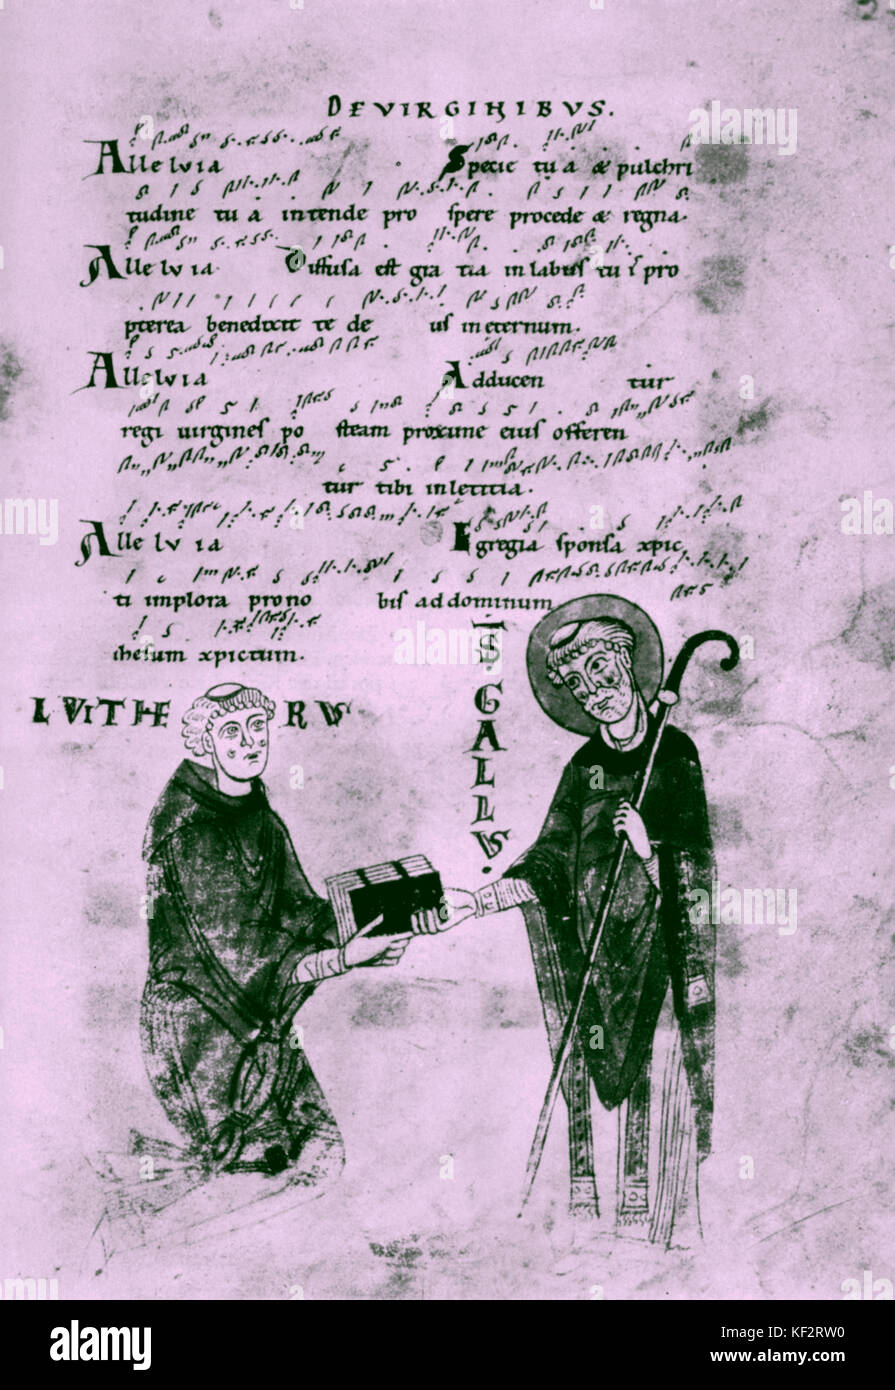 GREGORIAN  Music score from 12th century with neume (sign in plainsong indicating note or group of notes to be sung to a syllable) Illustration of the monk Luther giving the Mass to Saint Gallus. From St Gallen library. Stock Photo